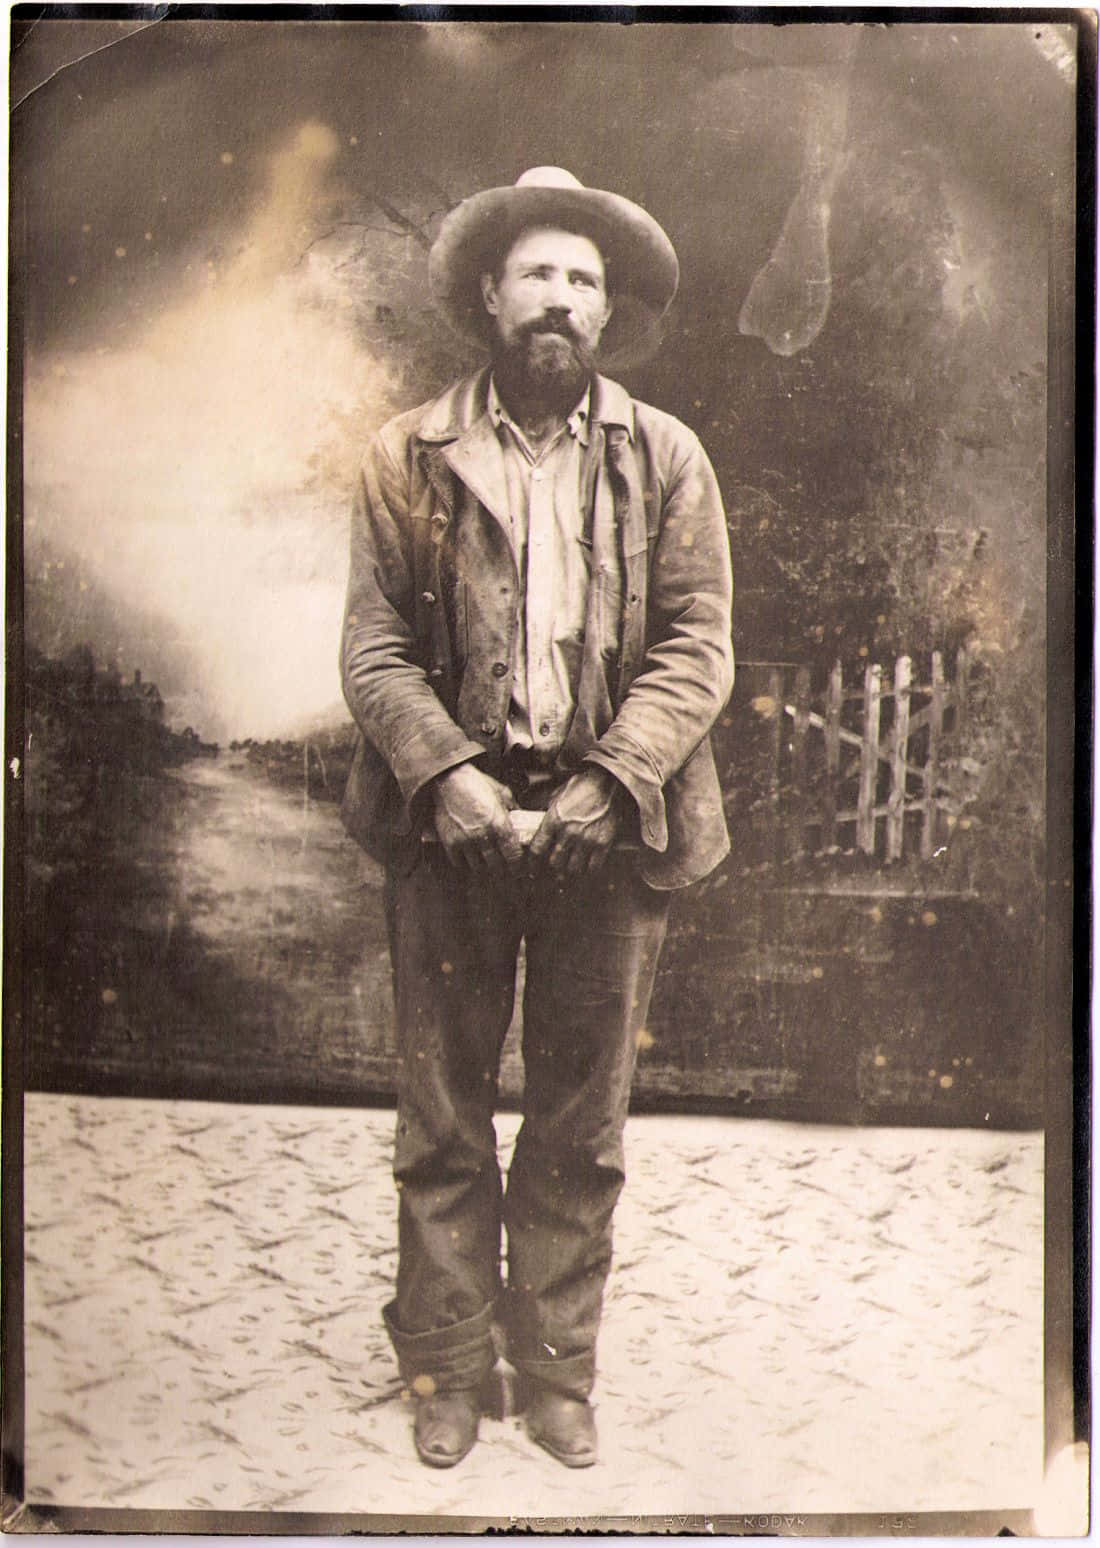 Old Cowboy With Beard Faded Picture